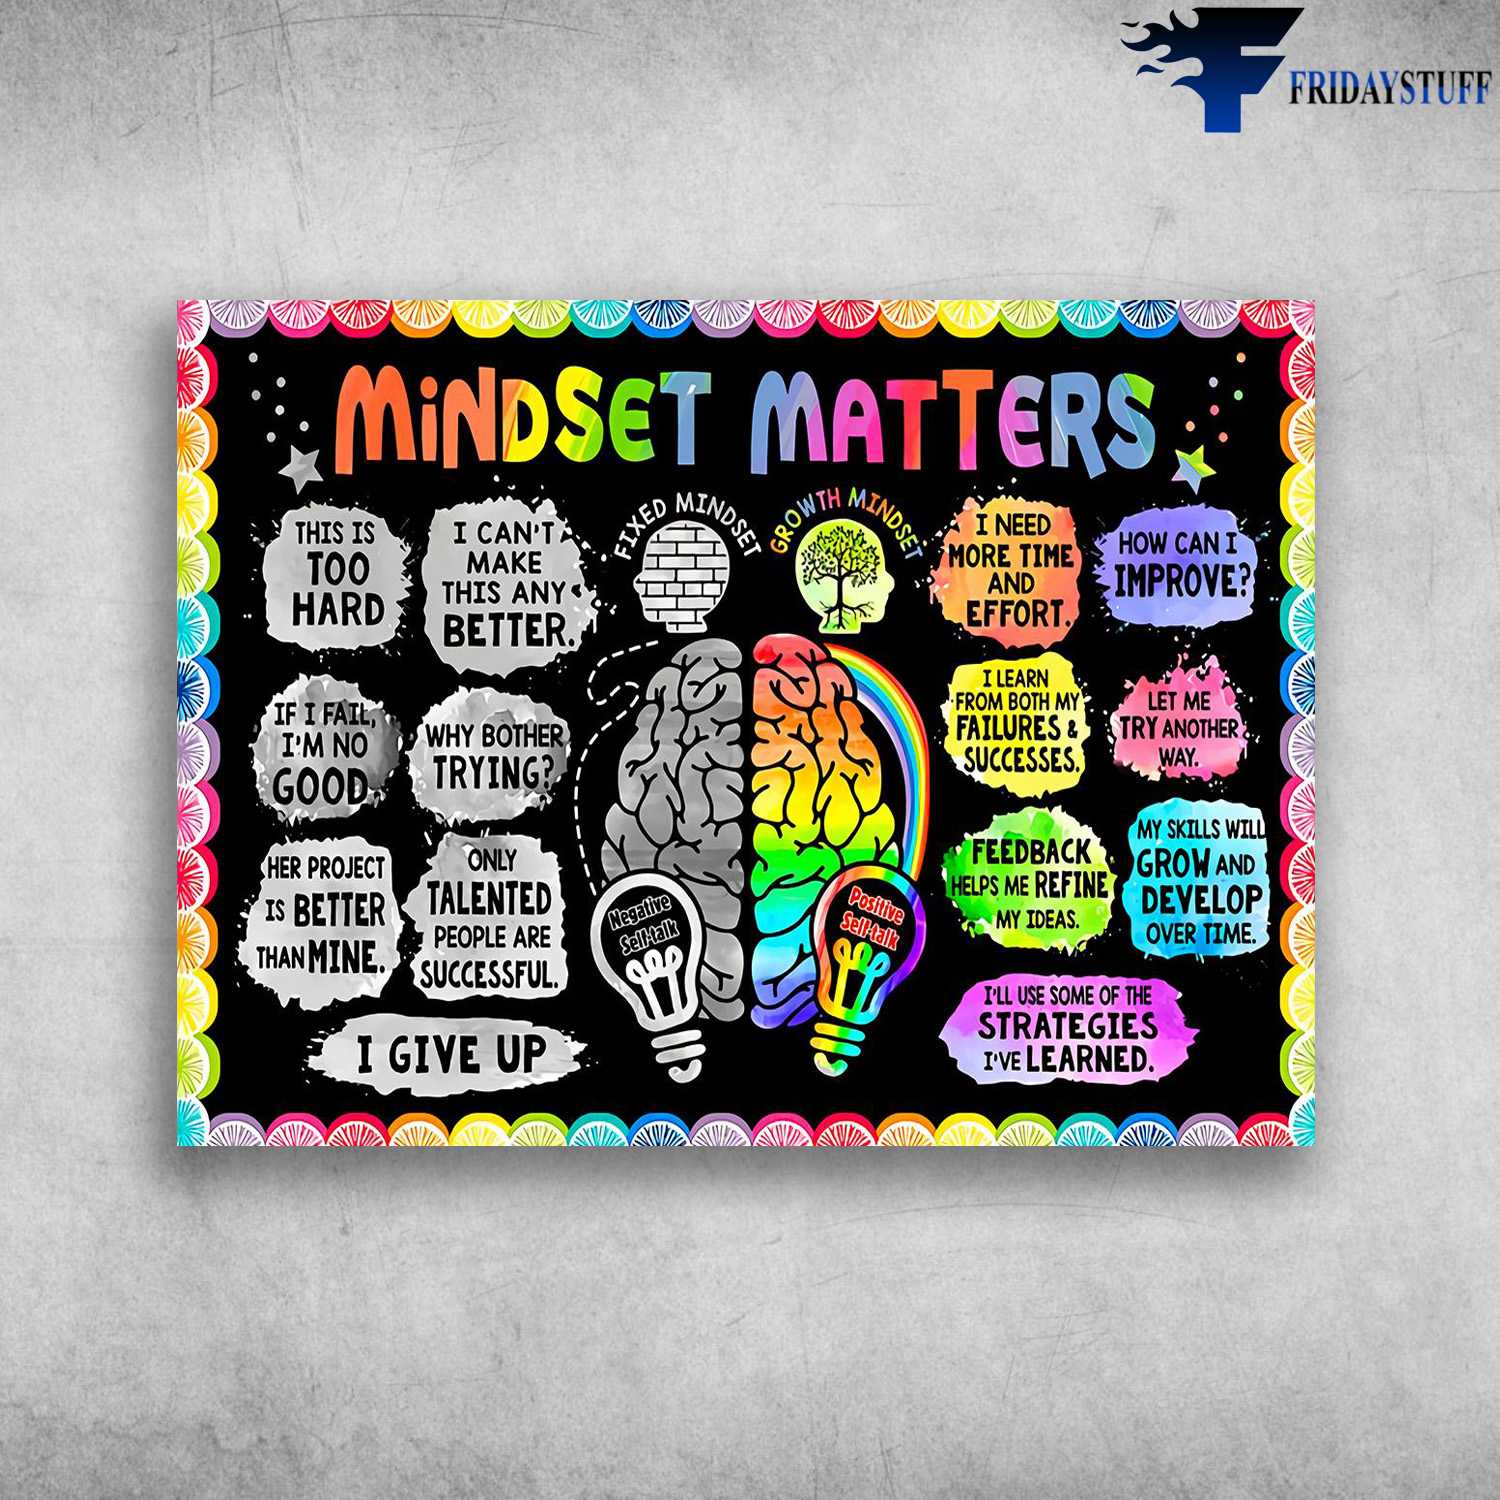 Mindset Matters - This Is Too Hard, I Can't Make This Any Better, If I Fall, I;m No Good, Why Bother Trying, I Need More Time And Effort, How Can I Improve